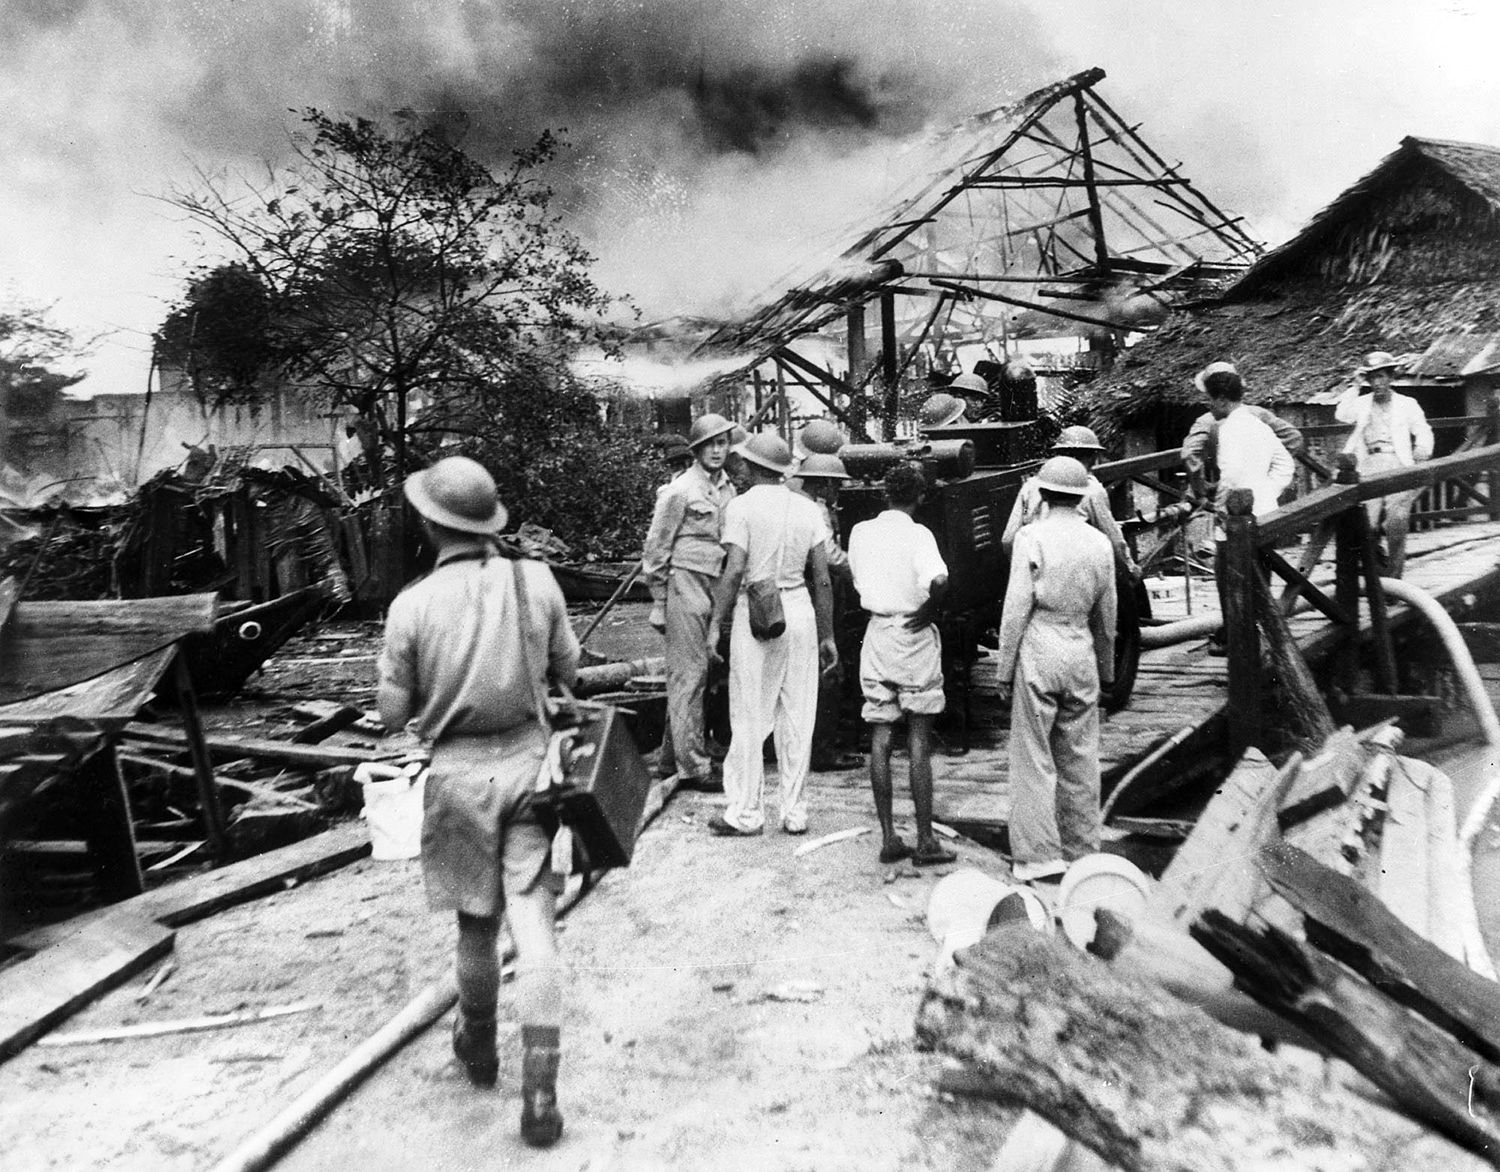 Australian soldiers, exhausted and stunned by the ferocity of the Japanese onslaught in Malaya, watch the destruction of an enemy air raid against Singapore unfold before their eyes in February 1942. 